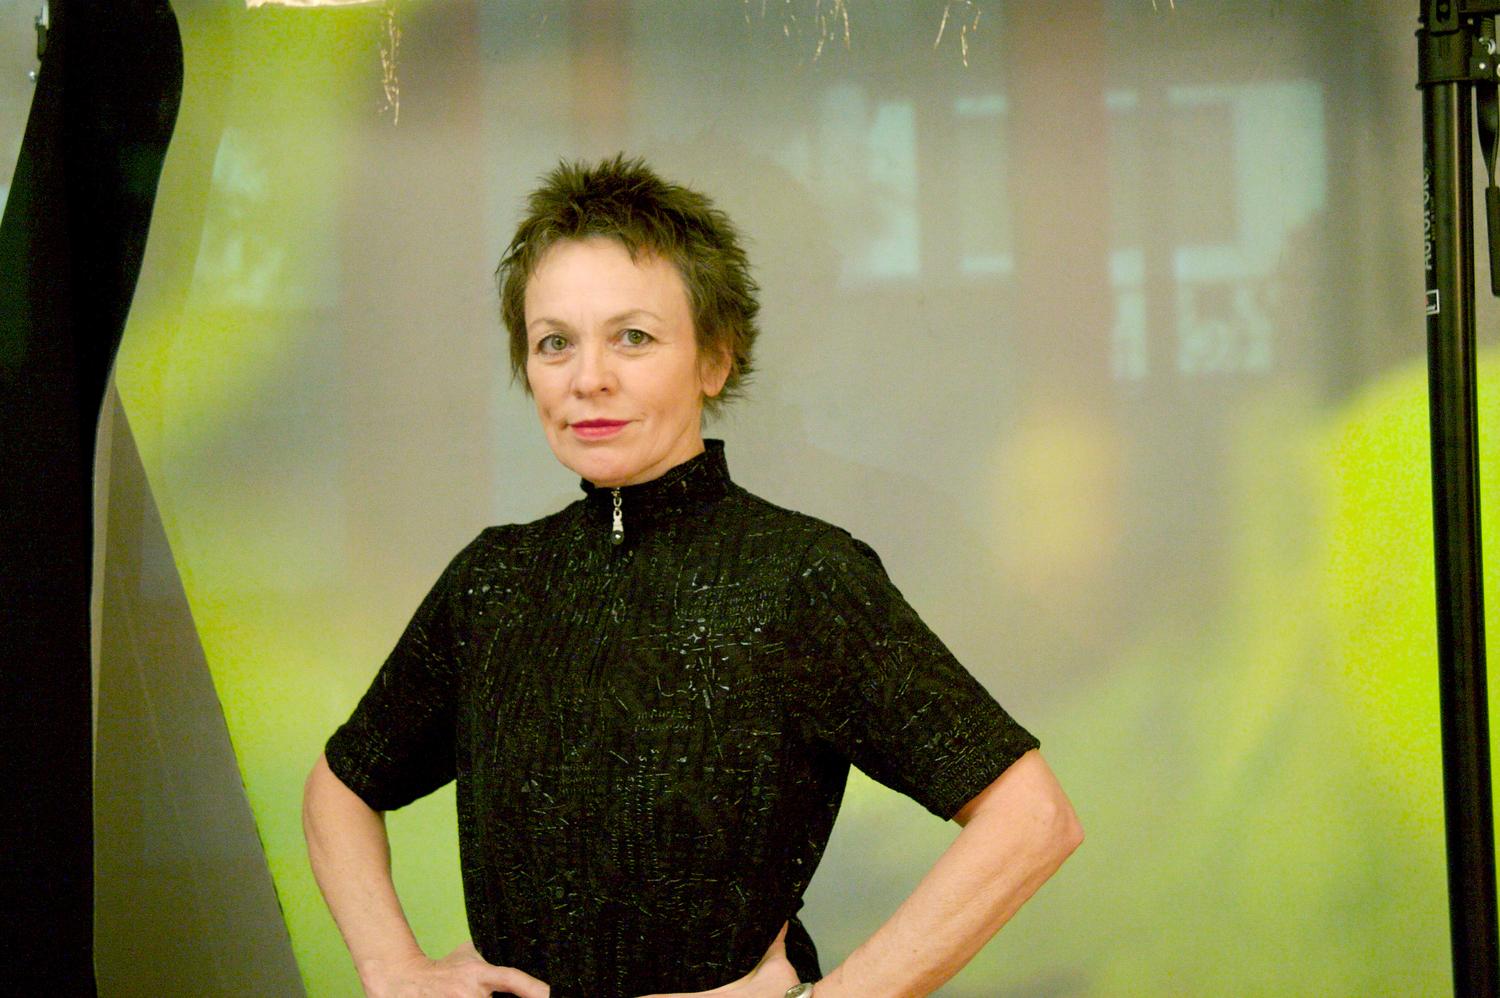 New Tech City’s Tech, Music & the Brain with Laurie Anderson and Guests